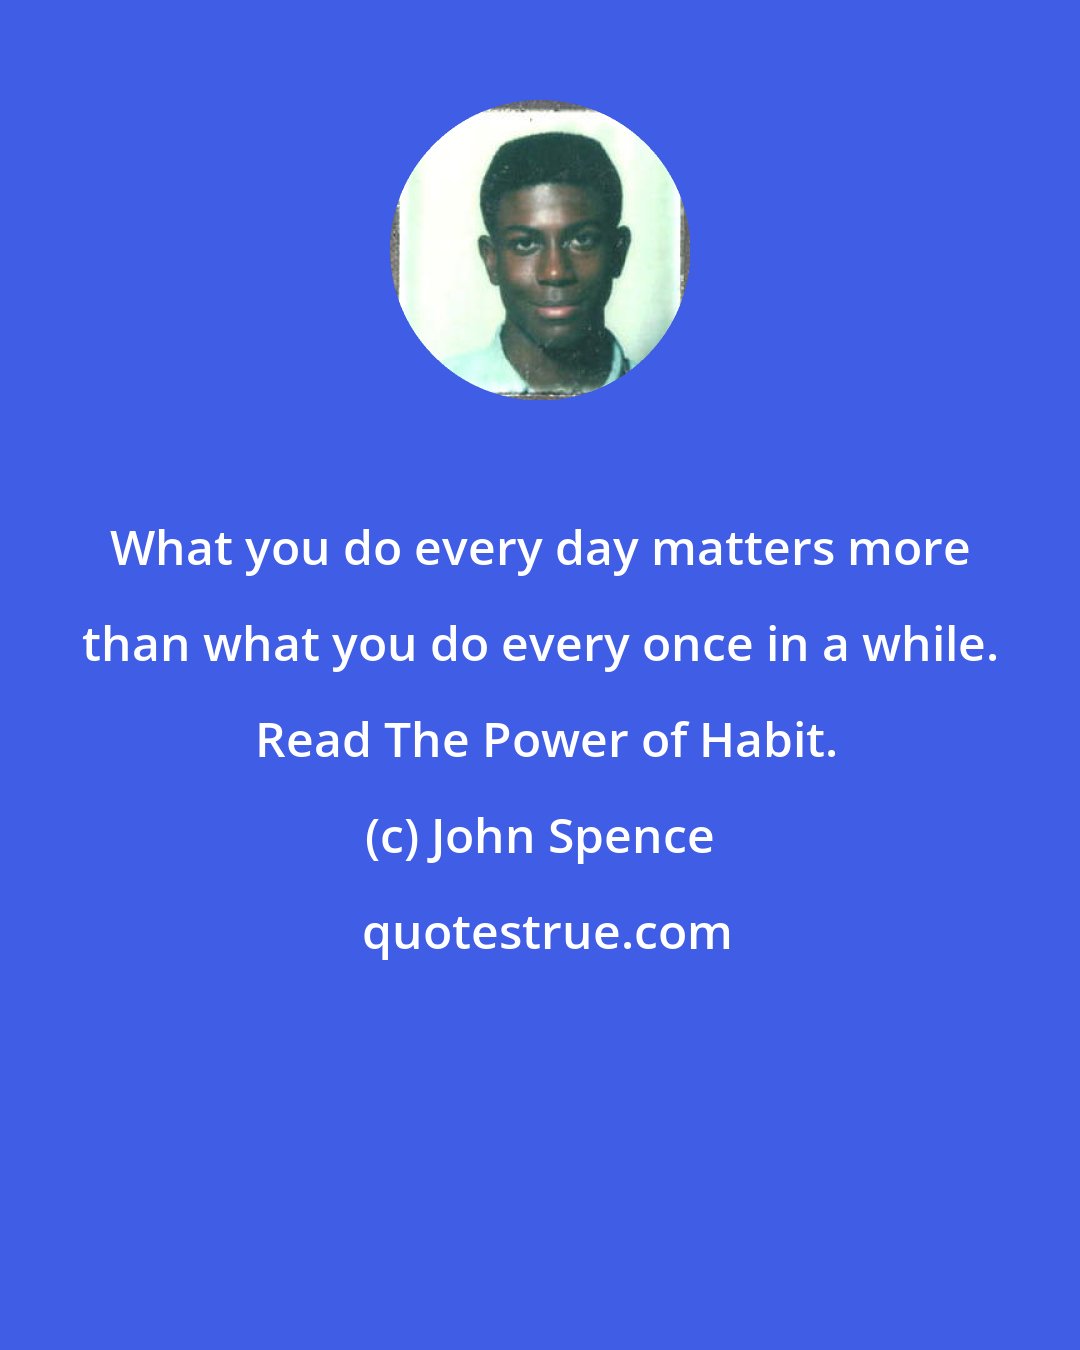 John Spence: What you do every day matters more than what you do every once in a while.  Read The Power of Habit.